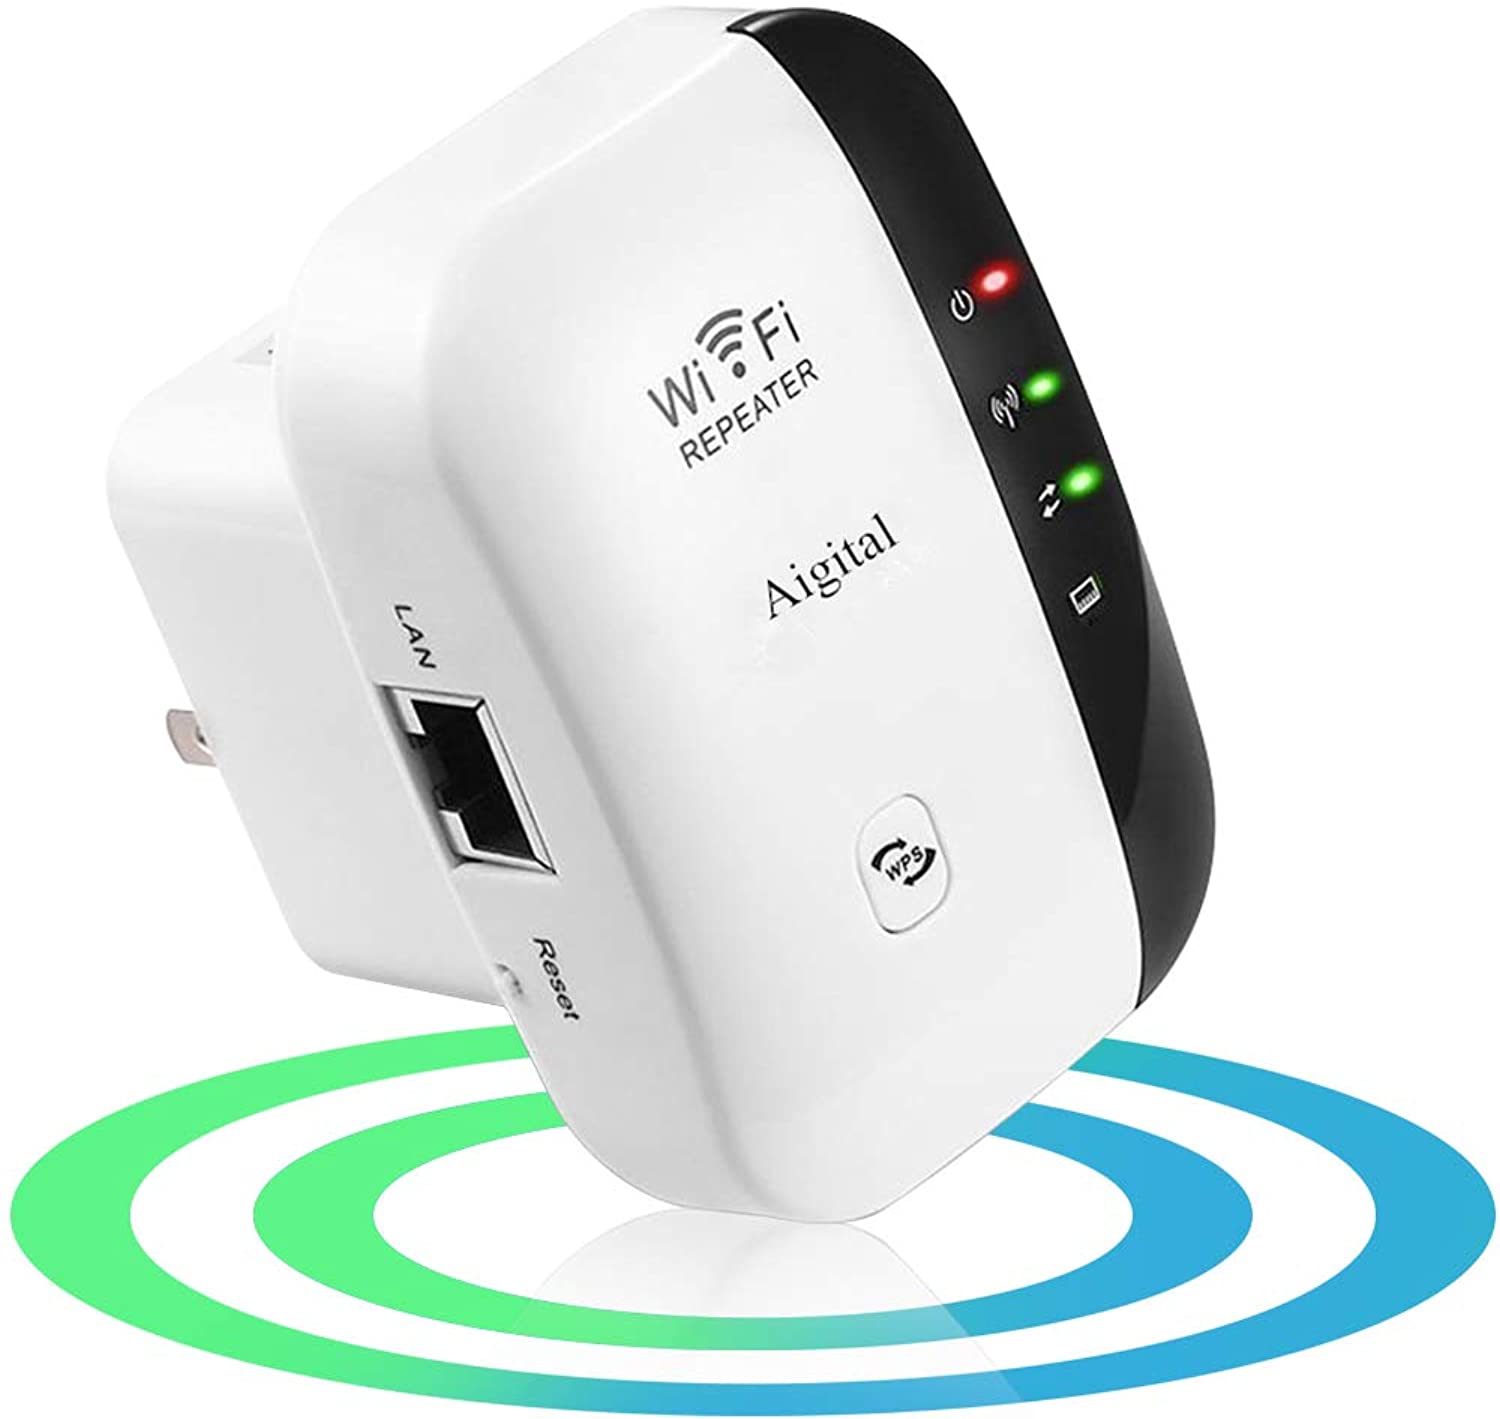 Built-in Antenna WiFi Extender Booster 300Mbps Aigital Wireless Repeater 2.4GHz Internet Signal Booster Easy Setup Supports Repeater/Access Point Mode Network Extender with WPS and Ethernet Port 